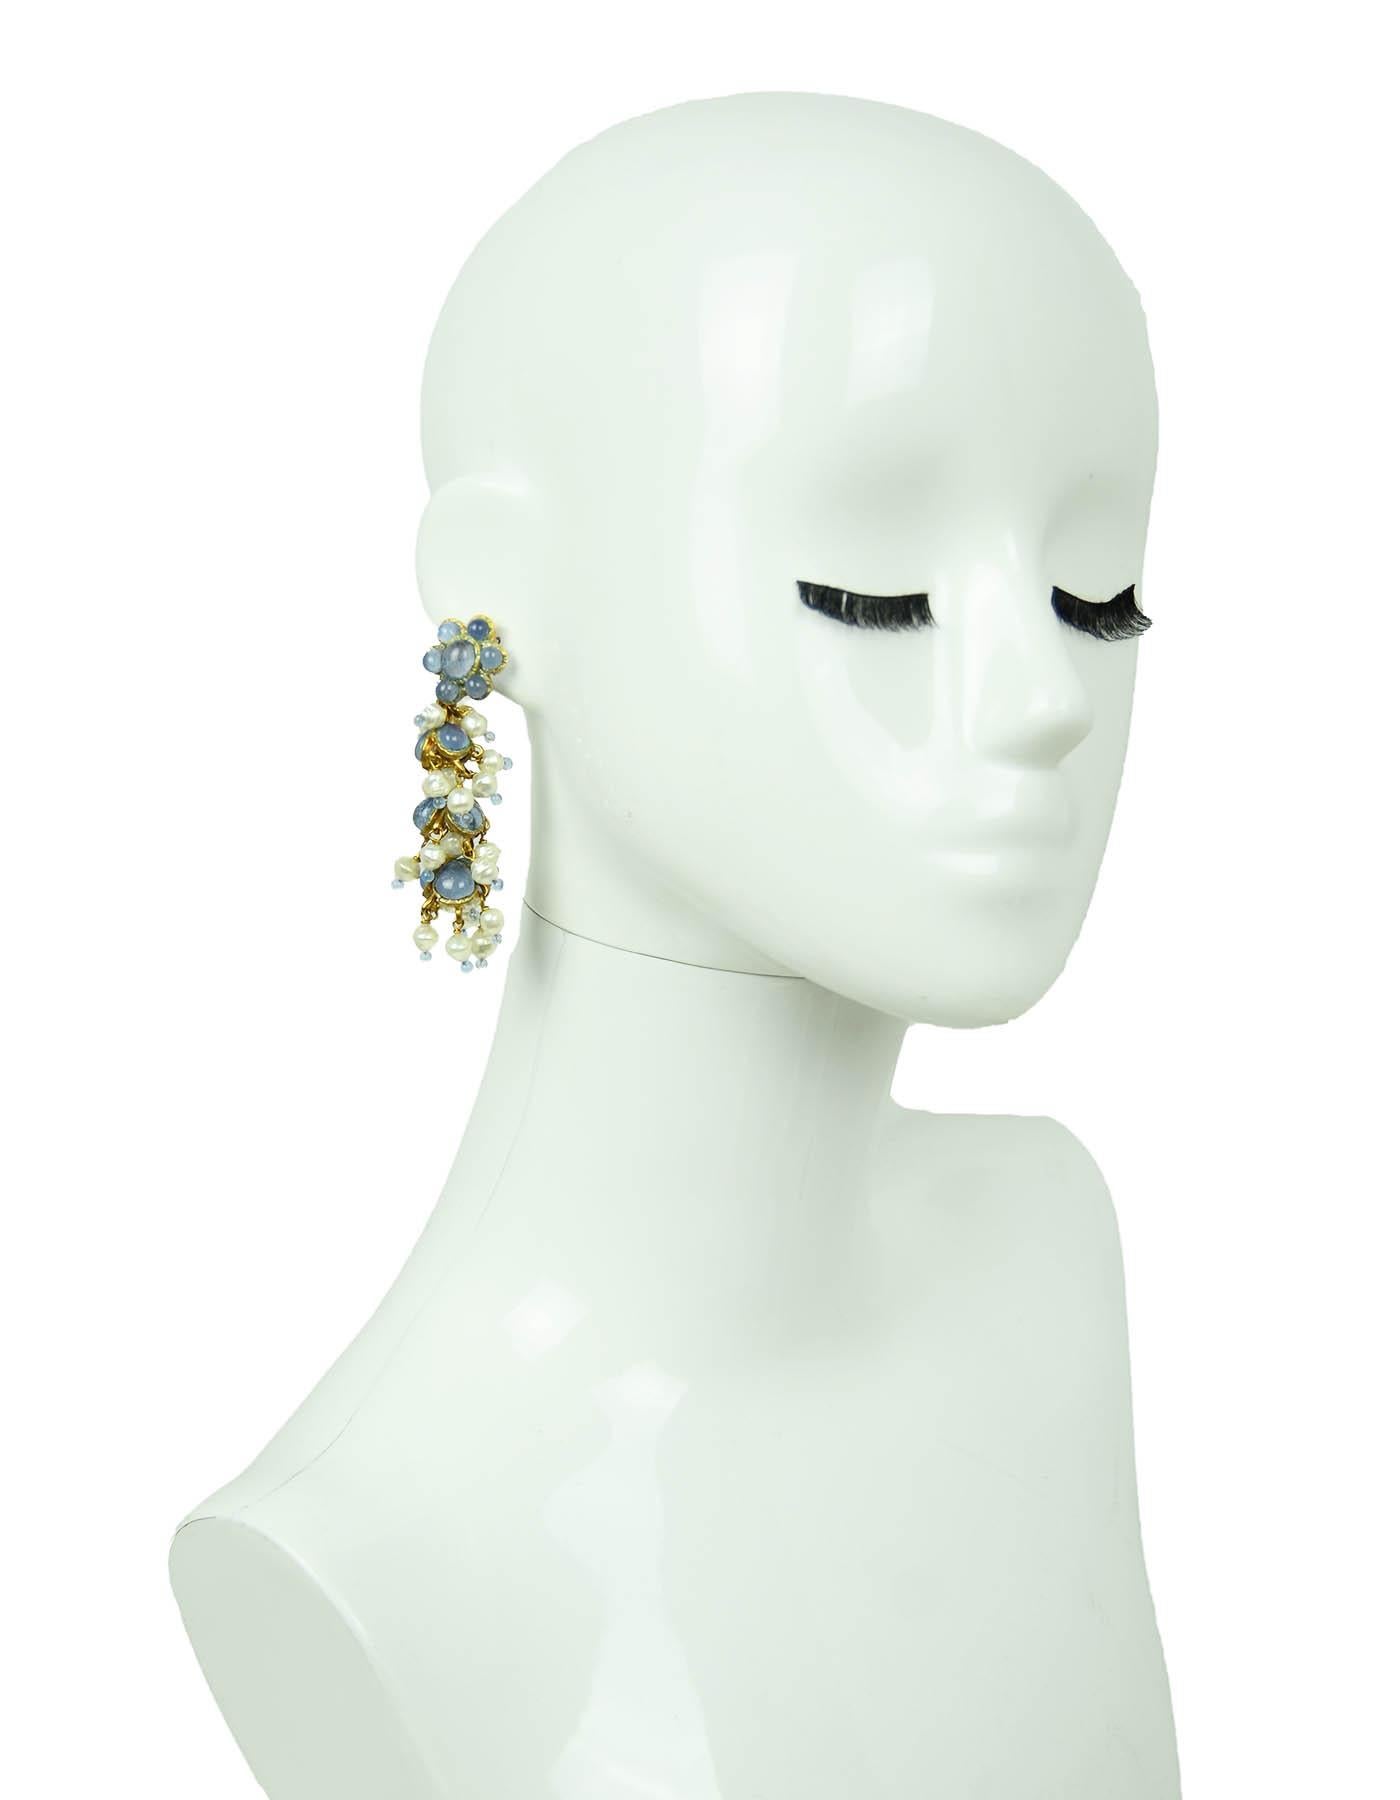 Chanel '90s Vintage Blue Gripoix & Faux Pearl Statement Earrings

Made In: France
Year of Production: 1990s
Color: Light blue, ivory, gold
Materials: Metal, faux pearl, gripoix glass
Hallmarks: CHANEL MADE IN FRANCE
Closure/Opening: Clip